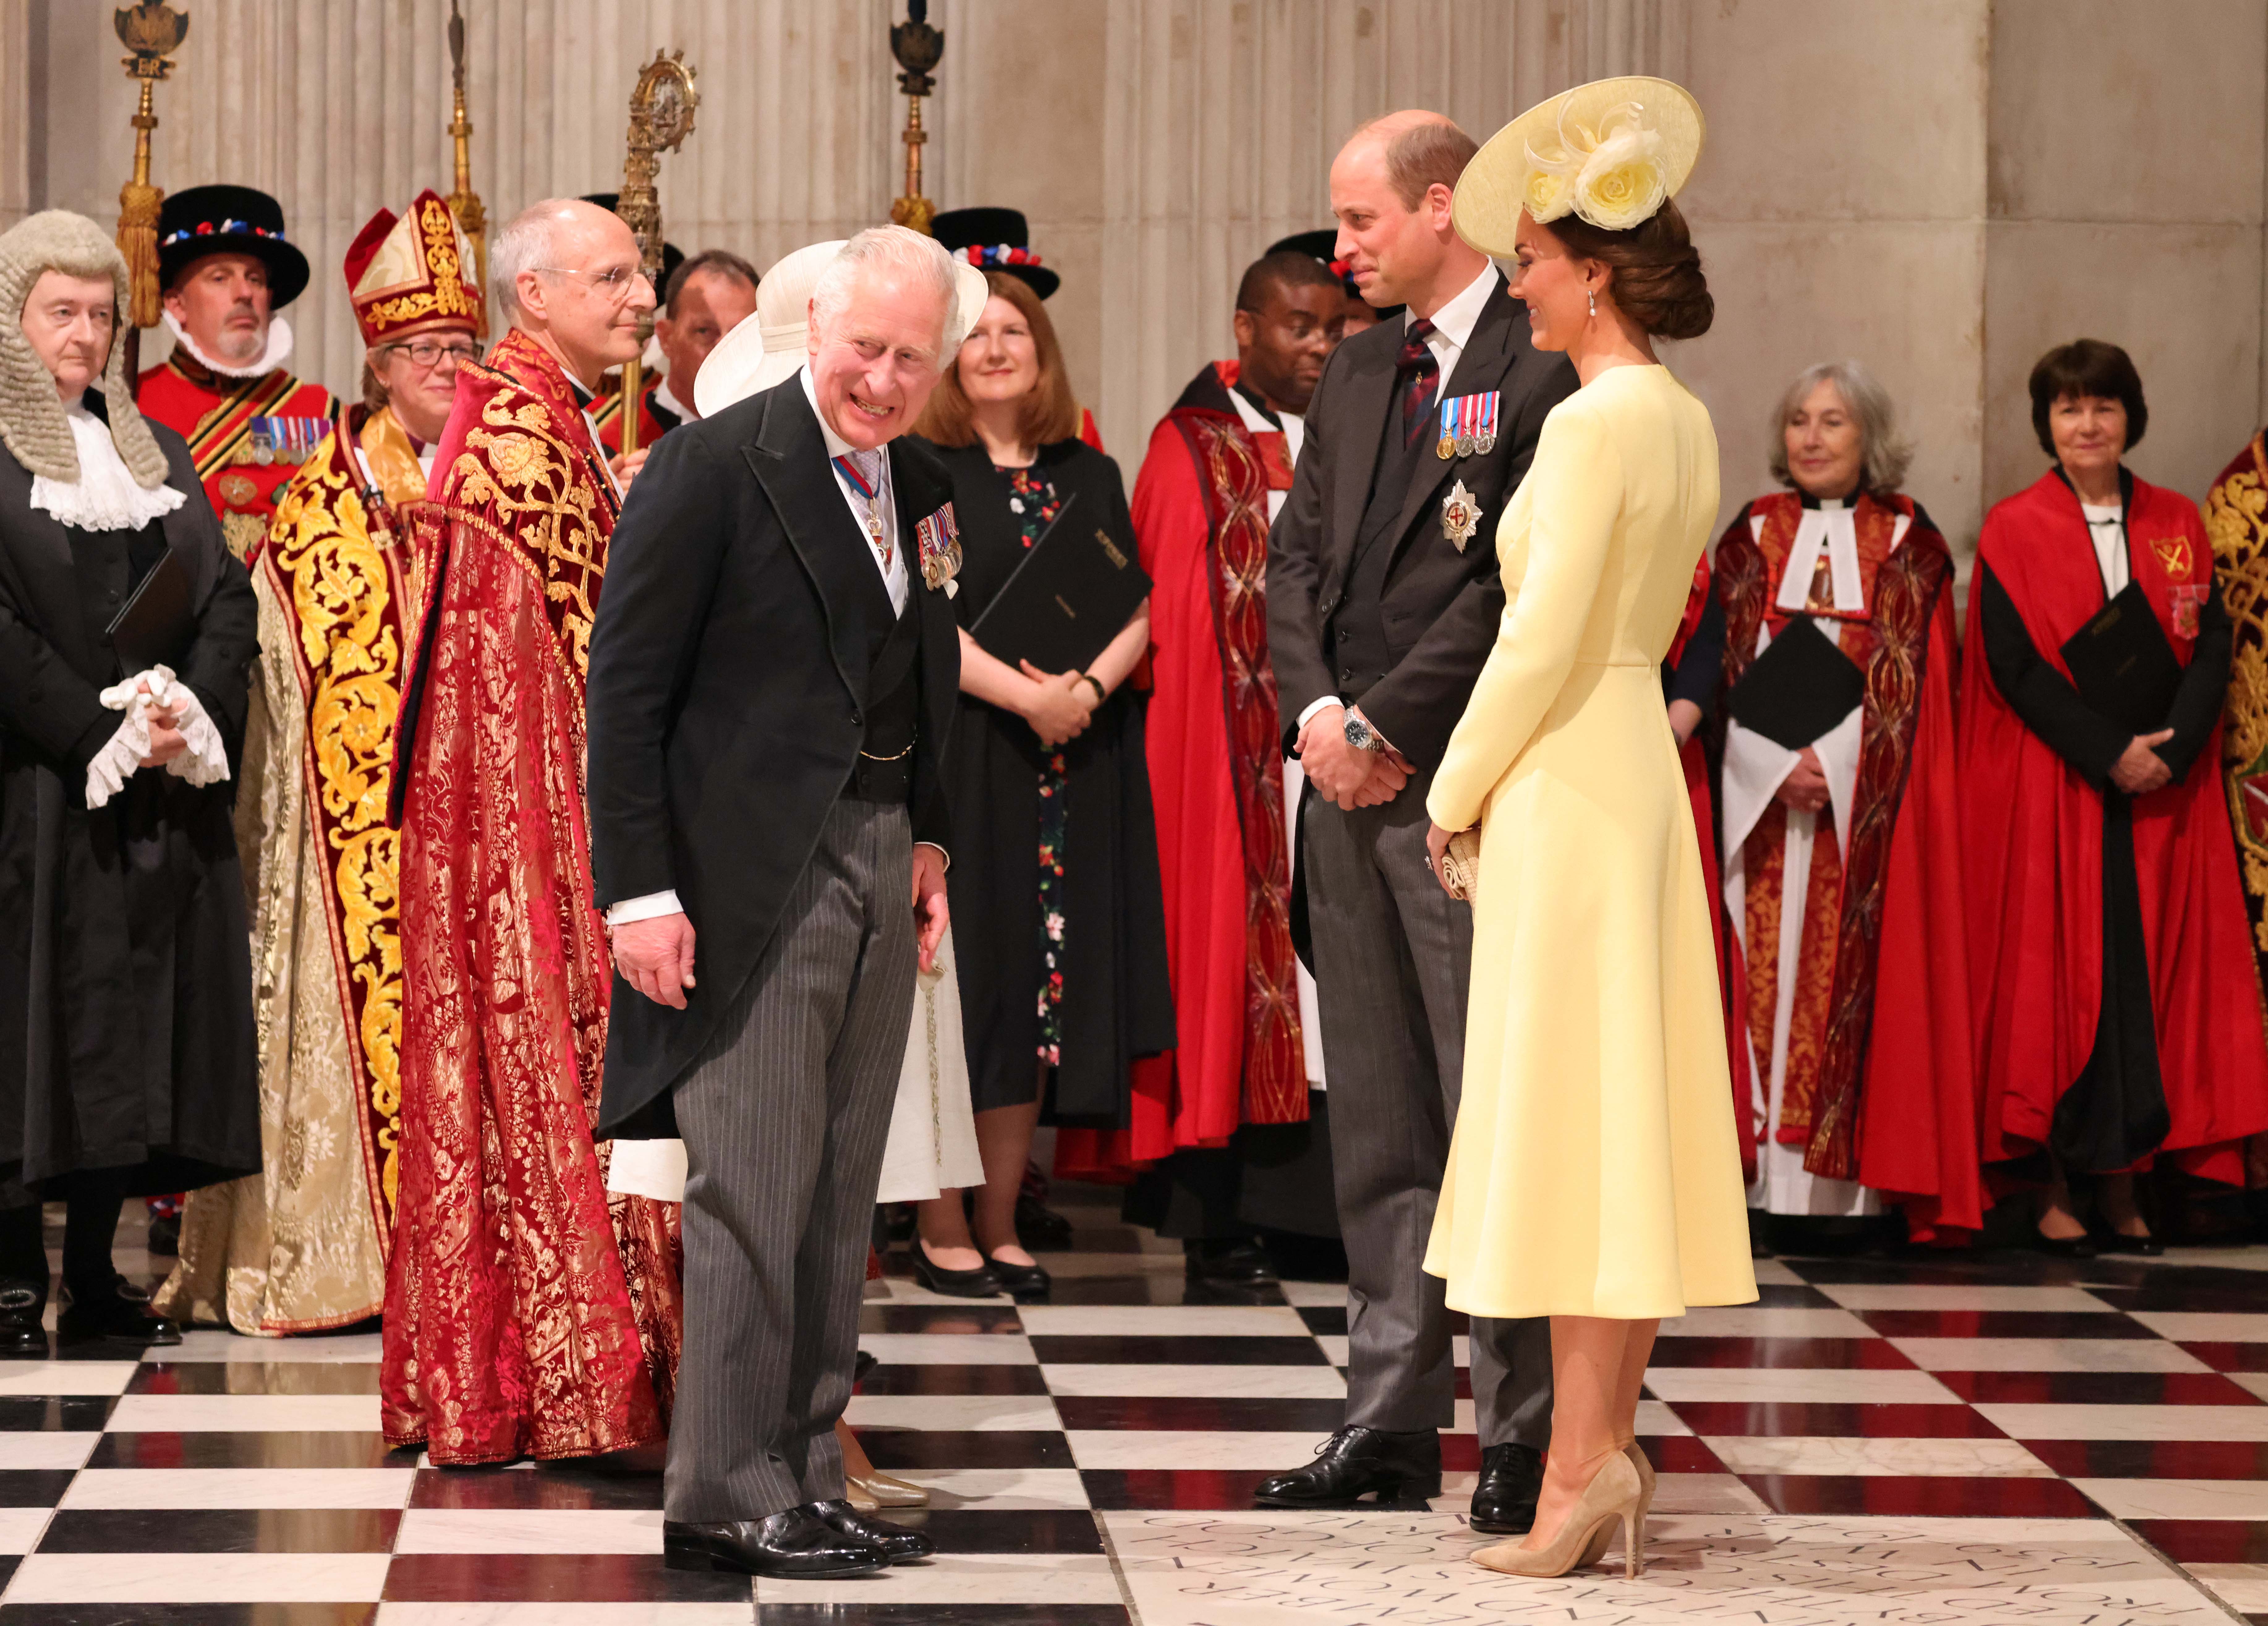 King Charles III, Princess Catherine, and Prince William at St Paul's cathedral for the service of thanksgiving for the Queen. on June 3, 2022 in London, England | Source: Getty Images